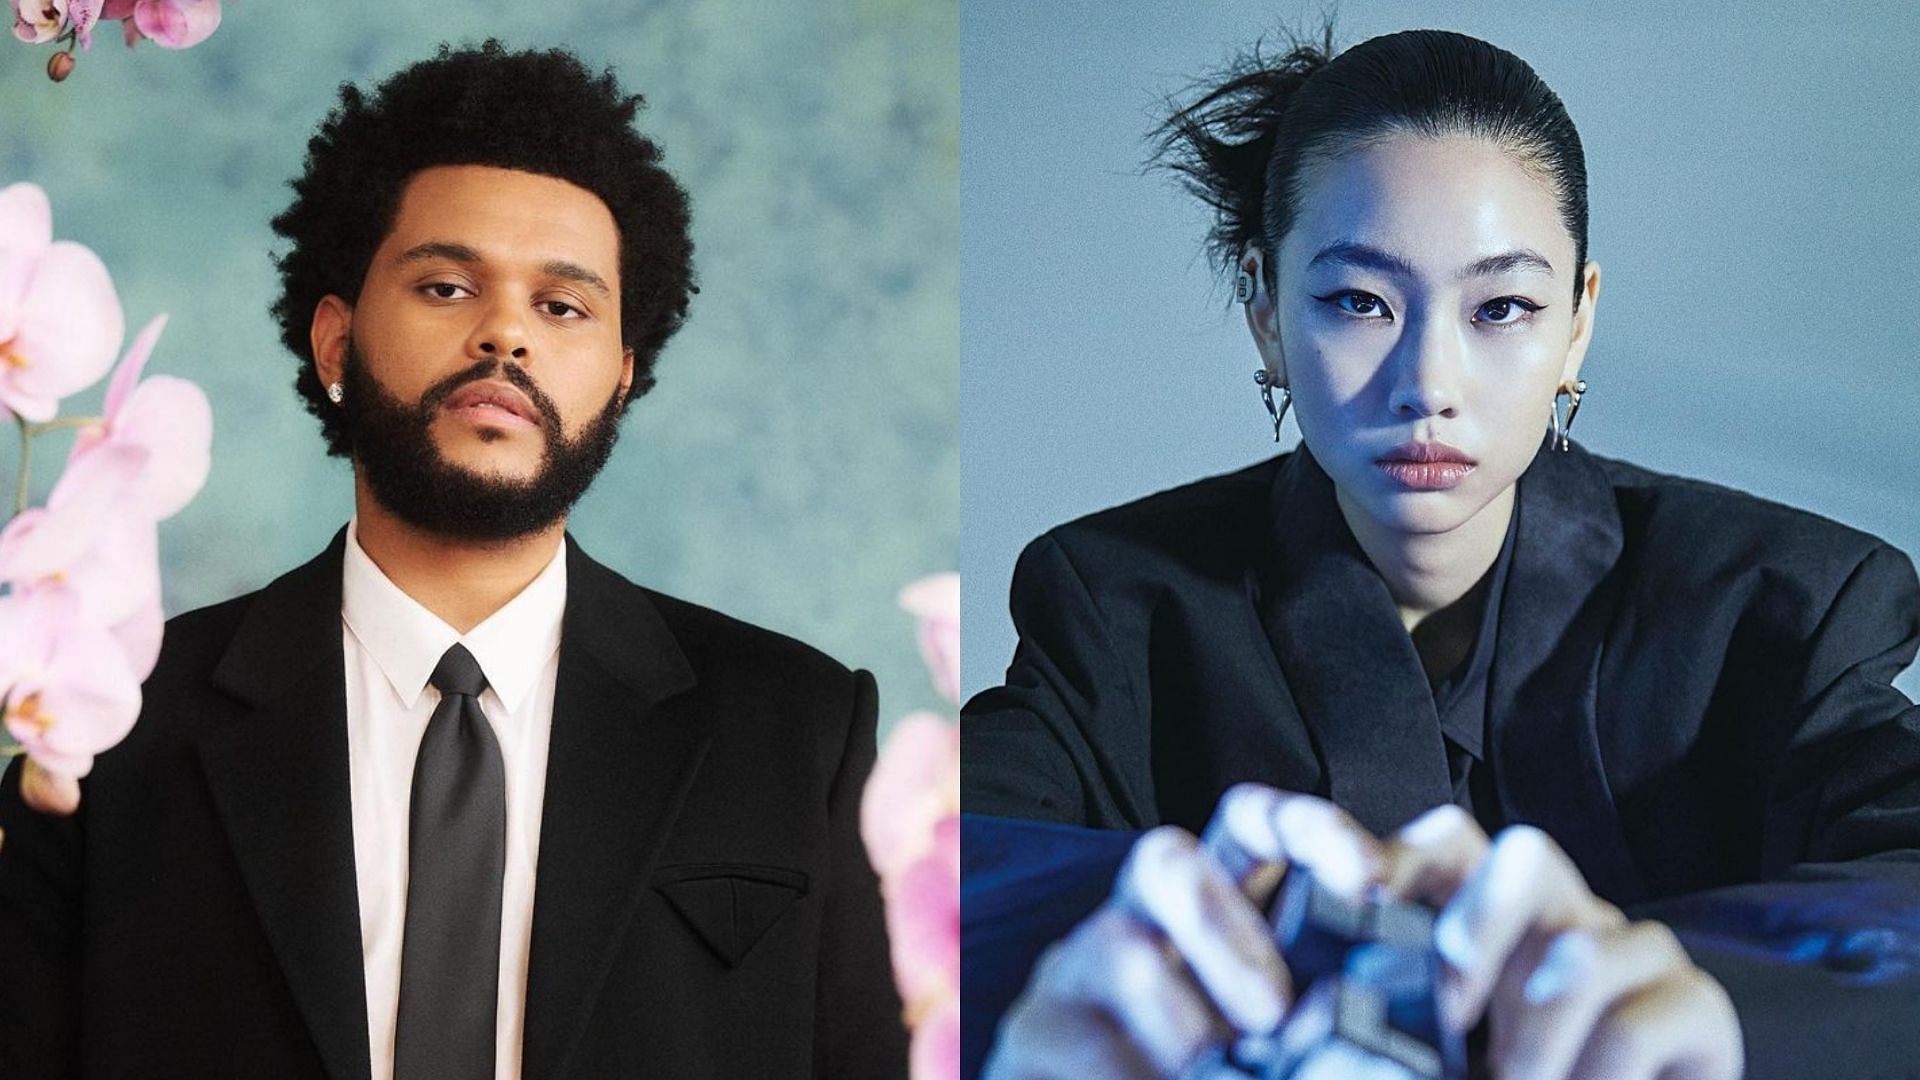 Squid Game' star Jung Ho-yeon to appear in The Weeknd's new music